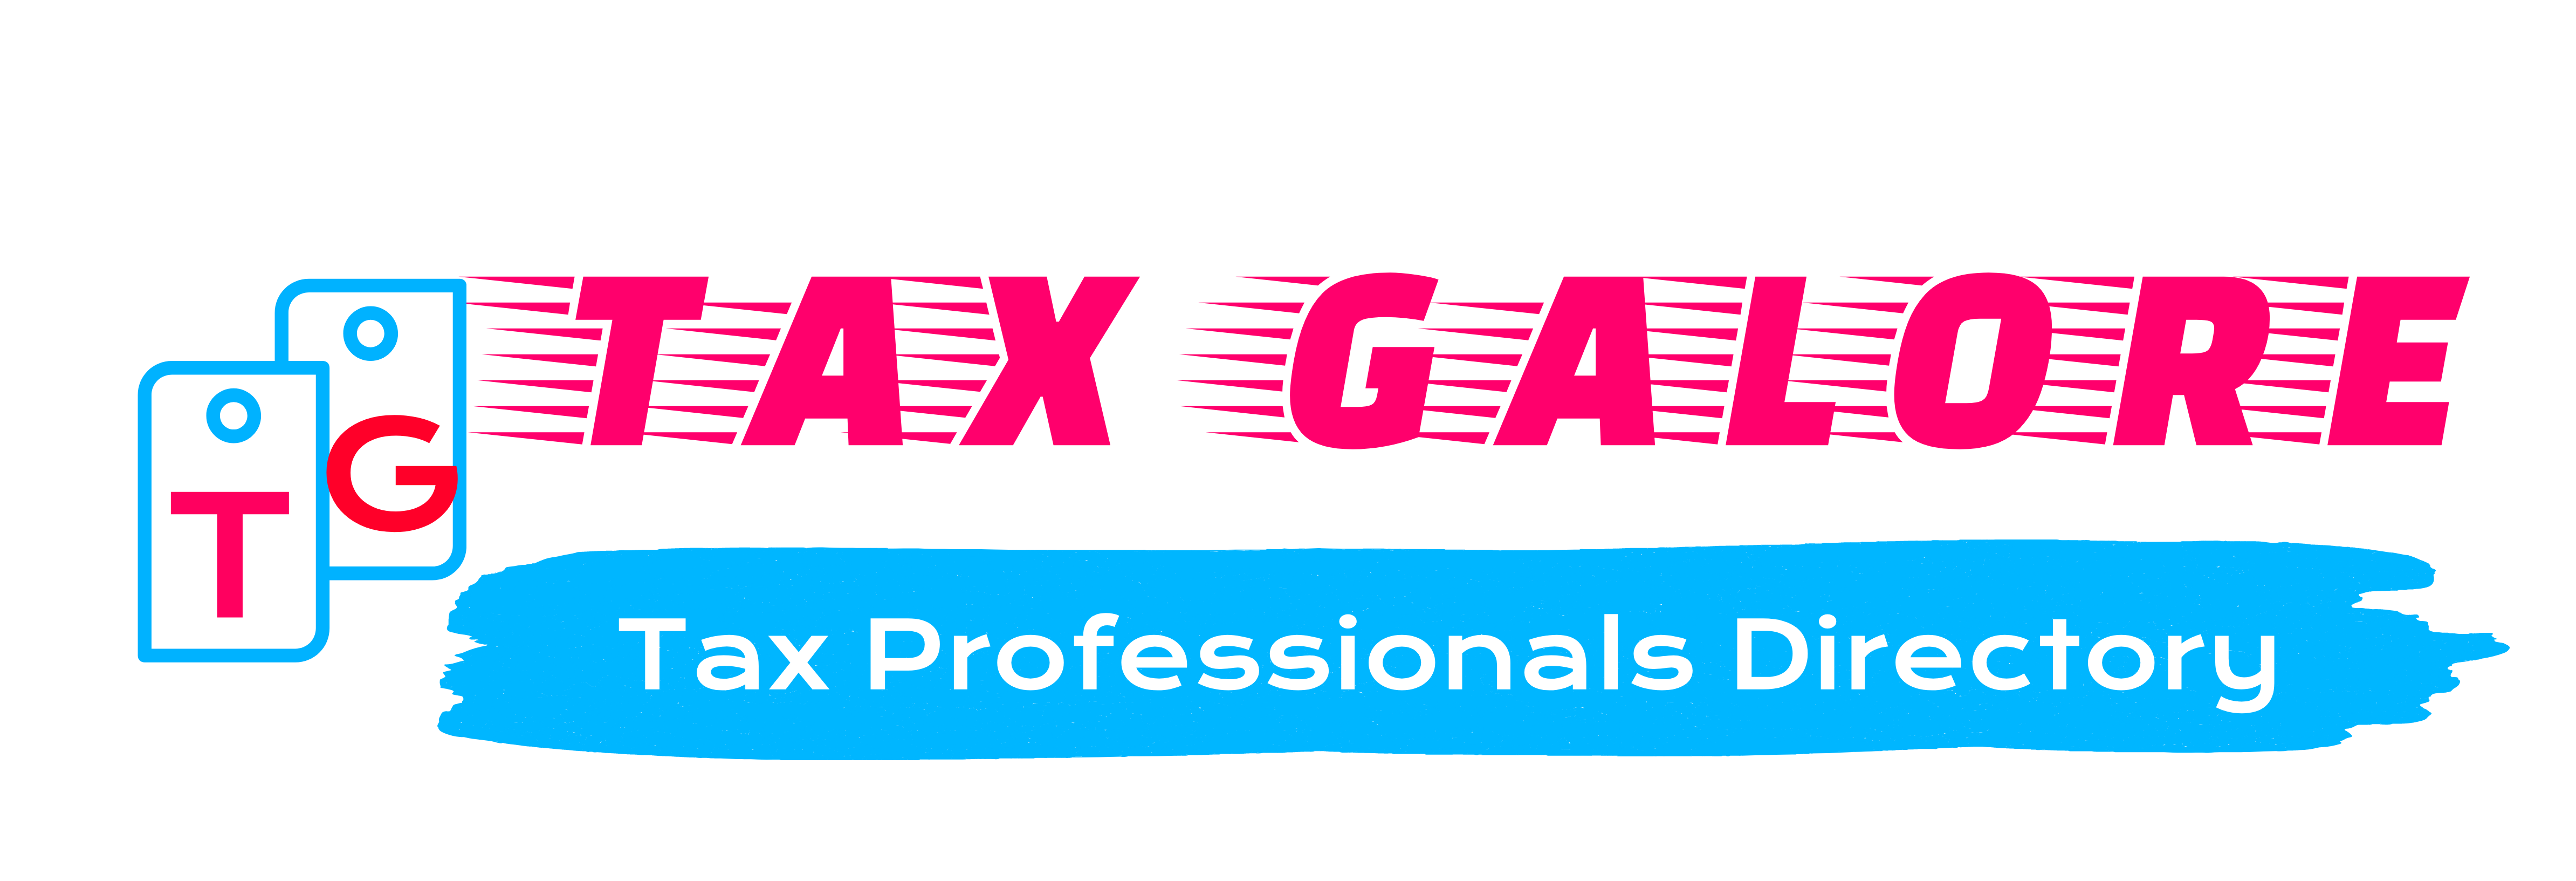 Featured at Tax Galore - Tax Professionals Directory